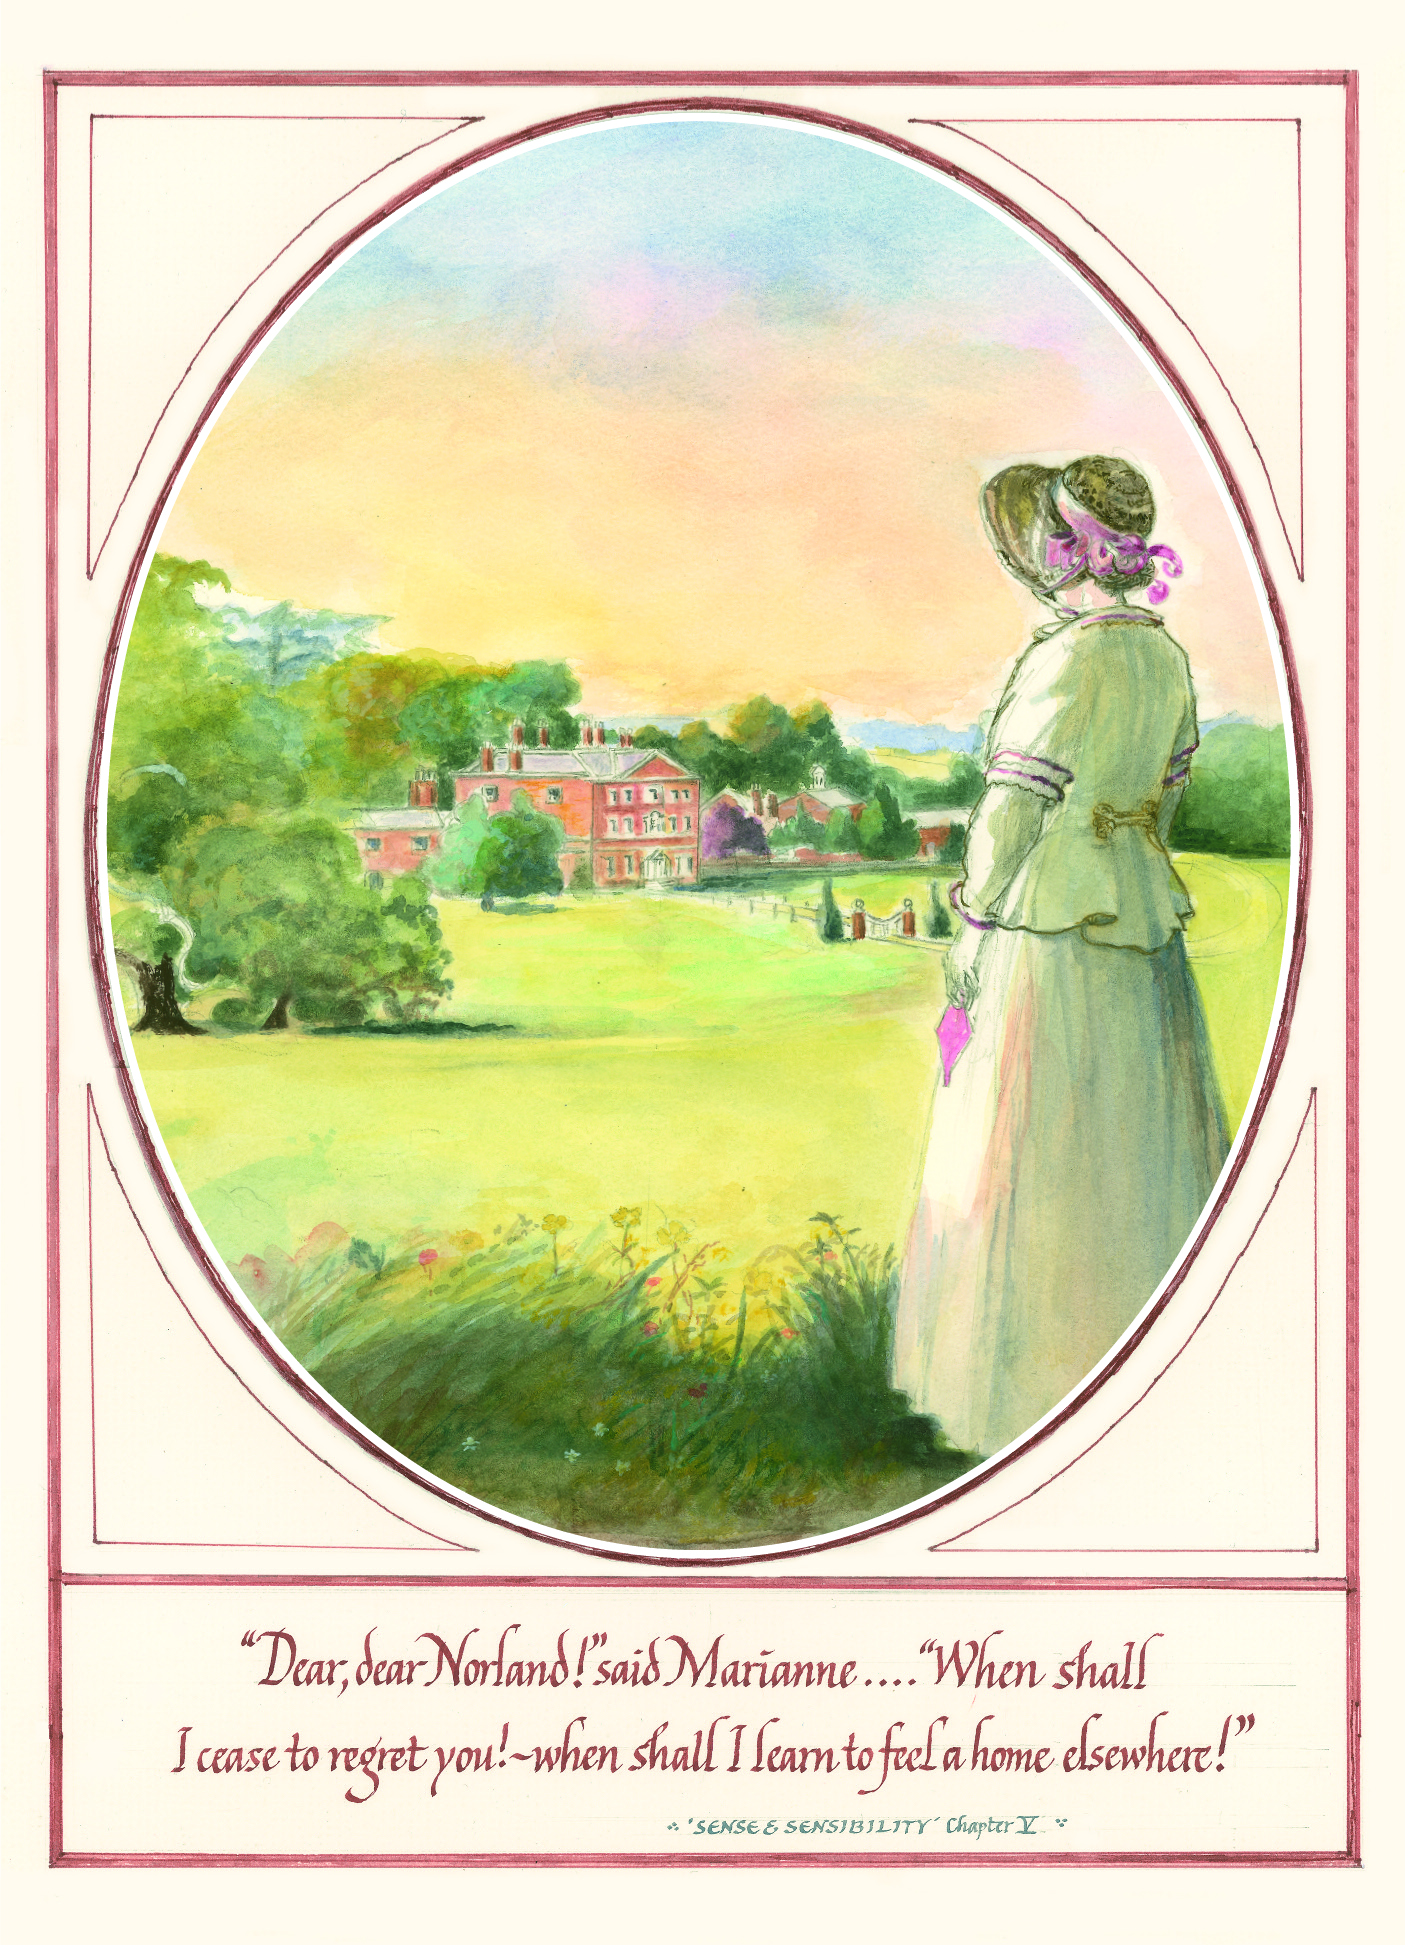 Dear, dear Norland! said Marianne - Jane Austen card on sale at Winchester Cathedral gift shop.